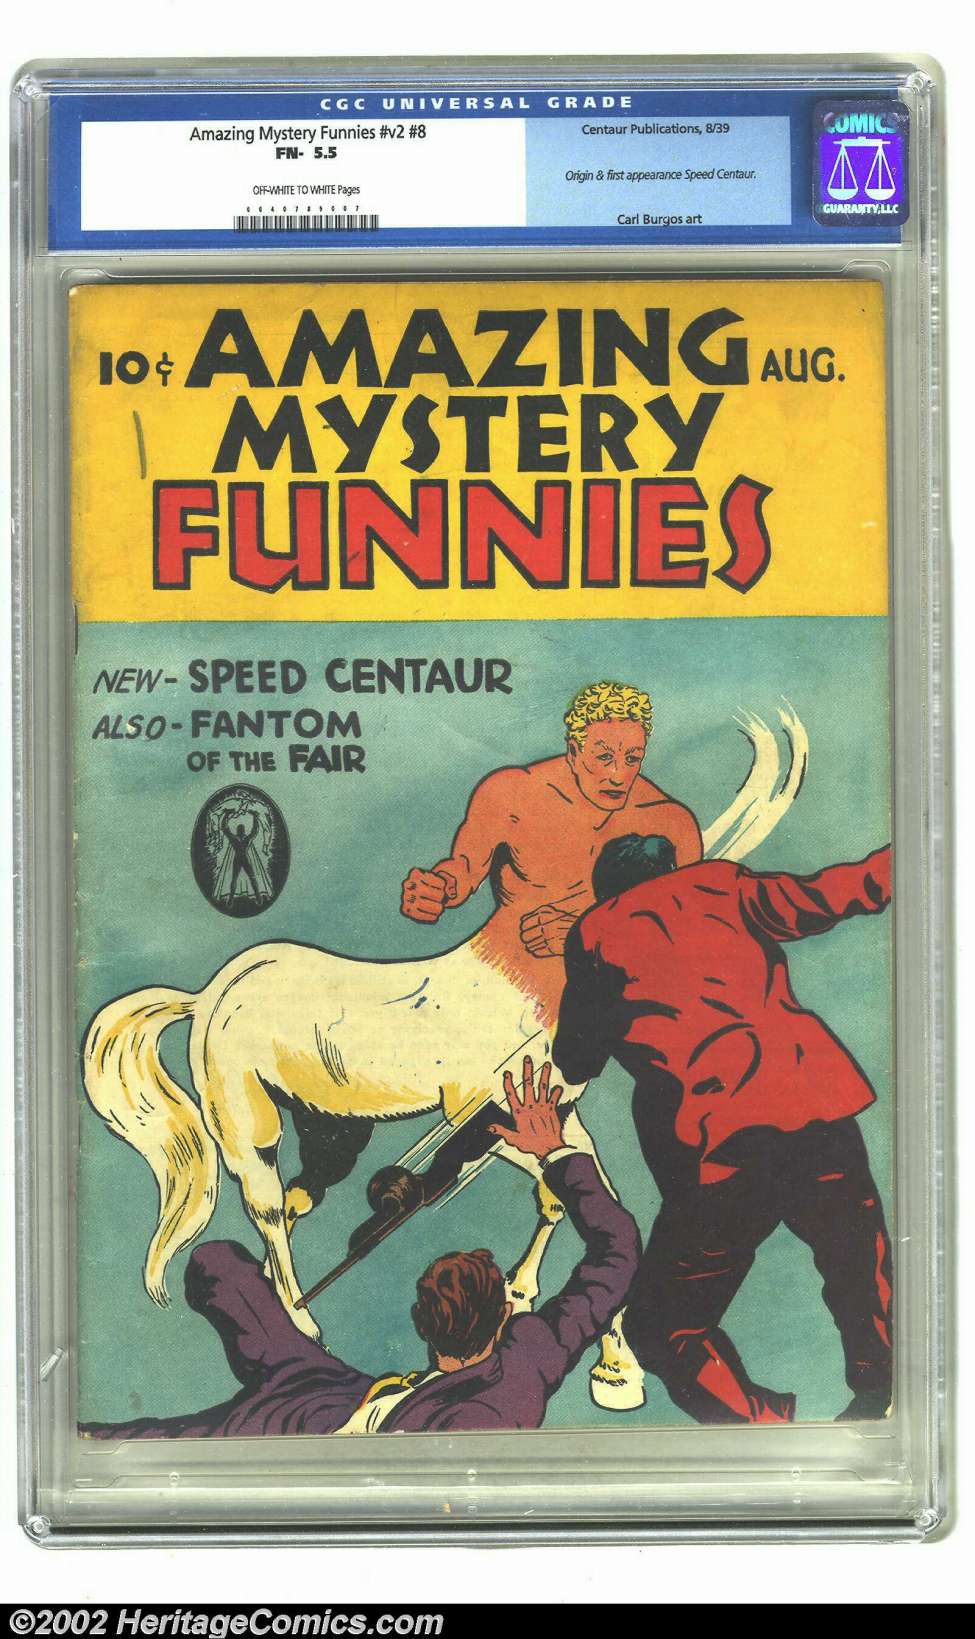 Book Cover For Amazing Mystery Funnies 12 (v2 8)